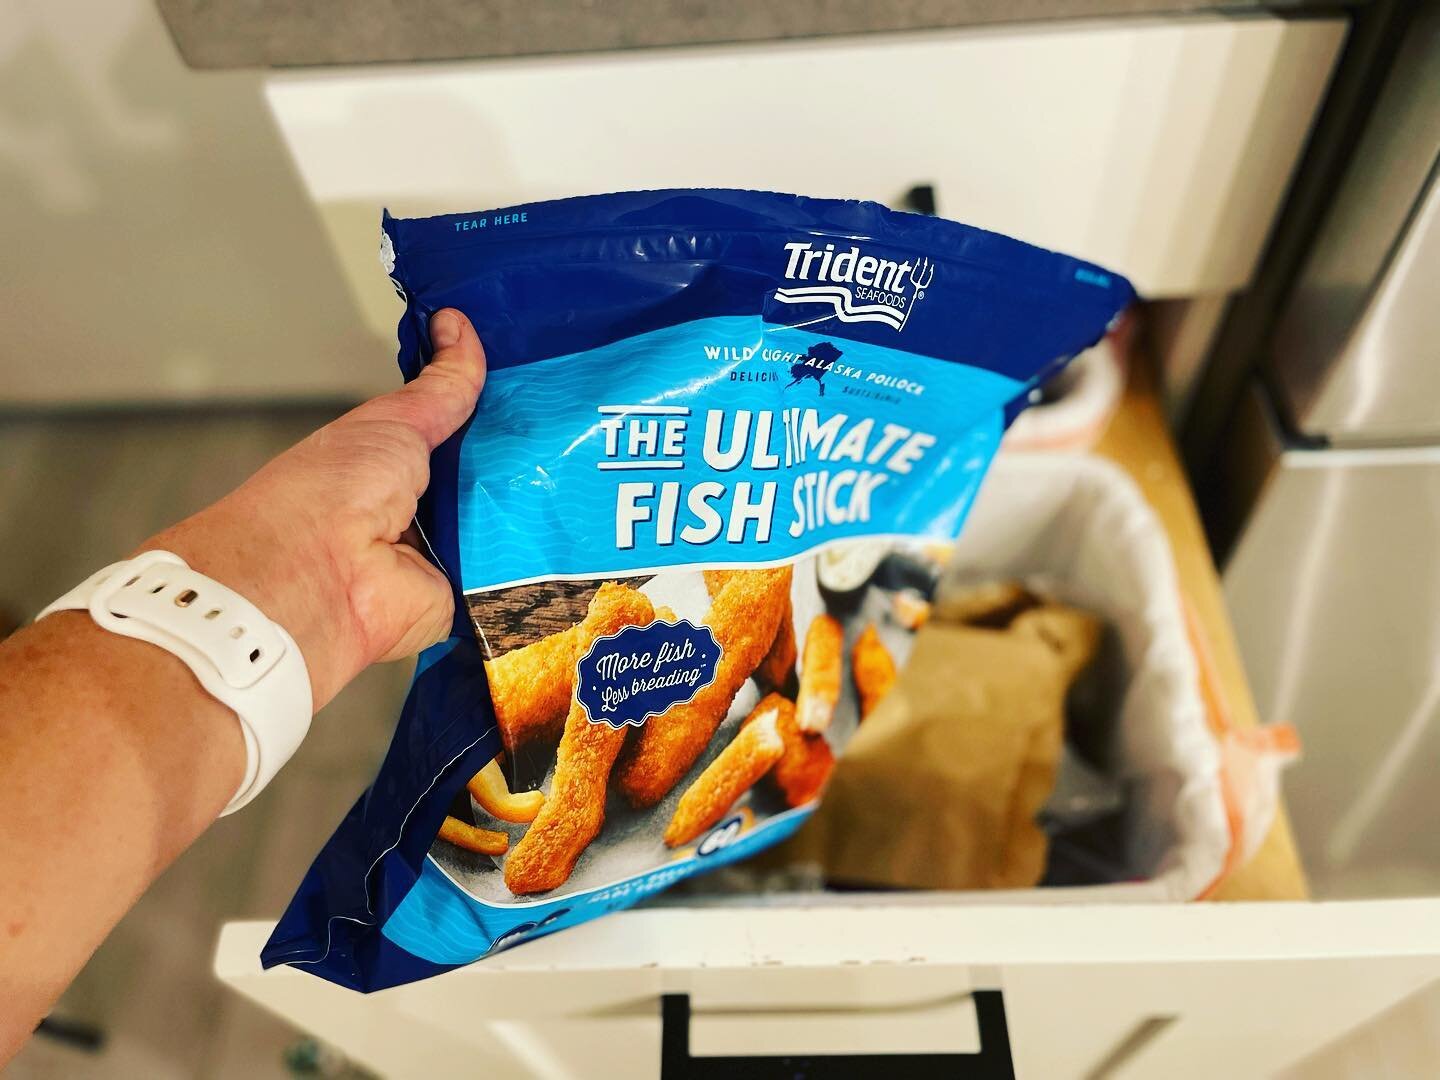 It was a typical story&hellip;

Boy loves fish sticks.

Mom buys fish sticks. 

Boy REALLY loves fish sticks, and fish sticks are one of the 5 foods Boy eats. 

Mom buys Costco-sized package of fish sticks.

Boy stops eating fish sticks. 

#momlife #